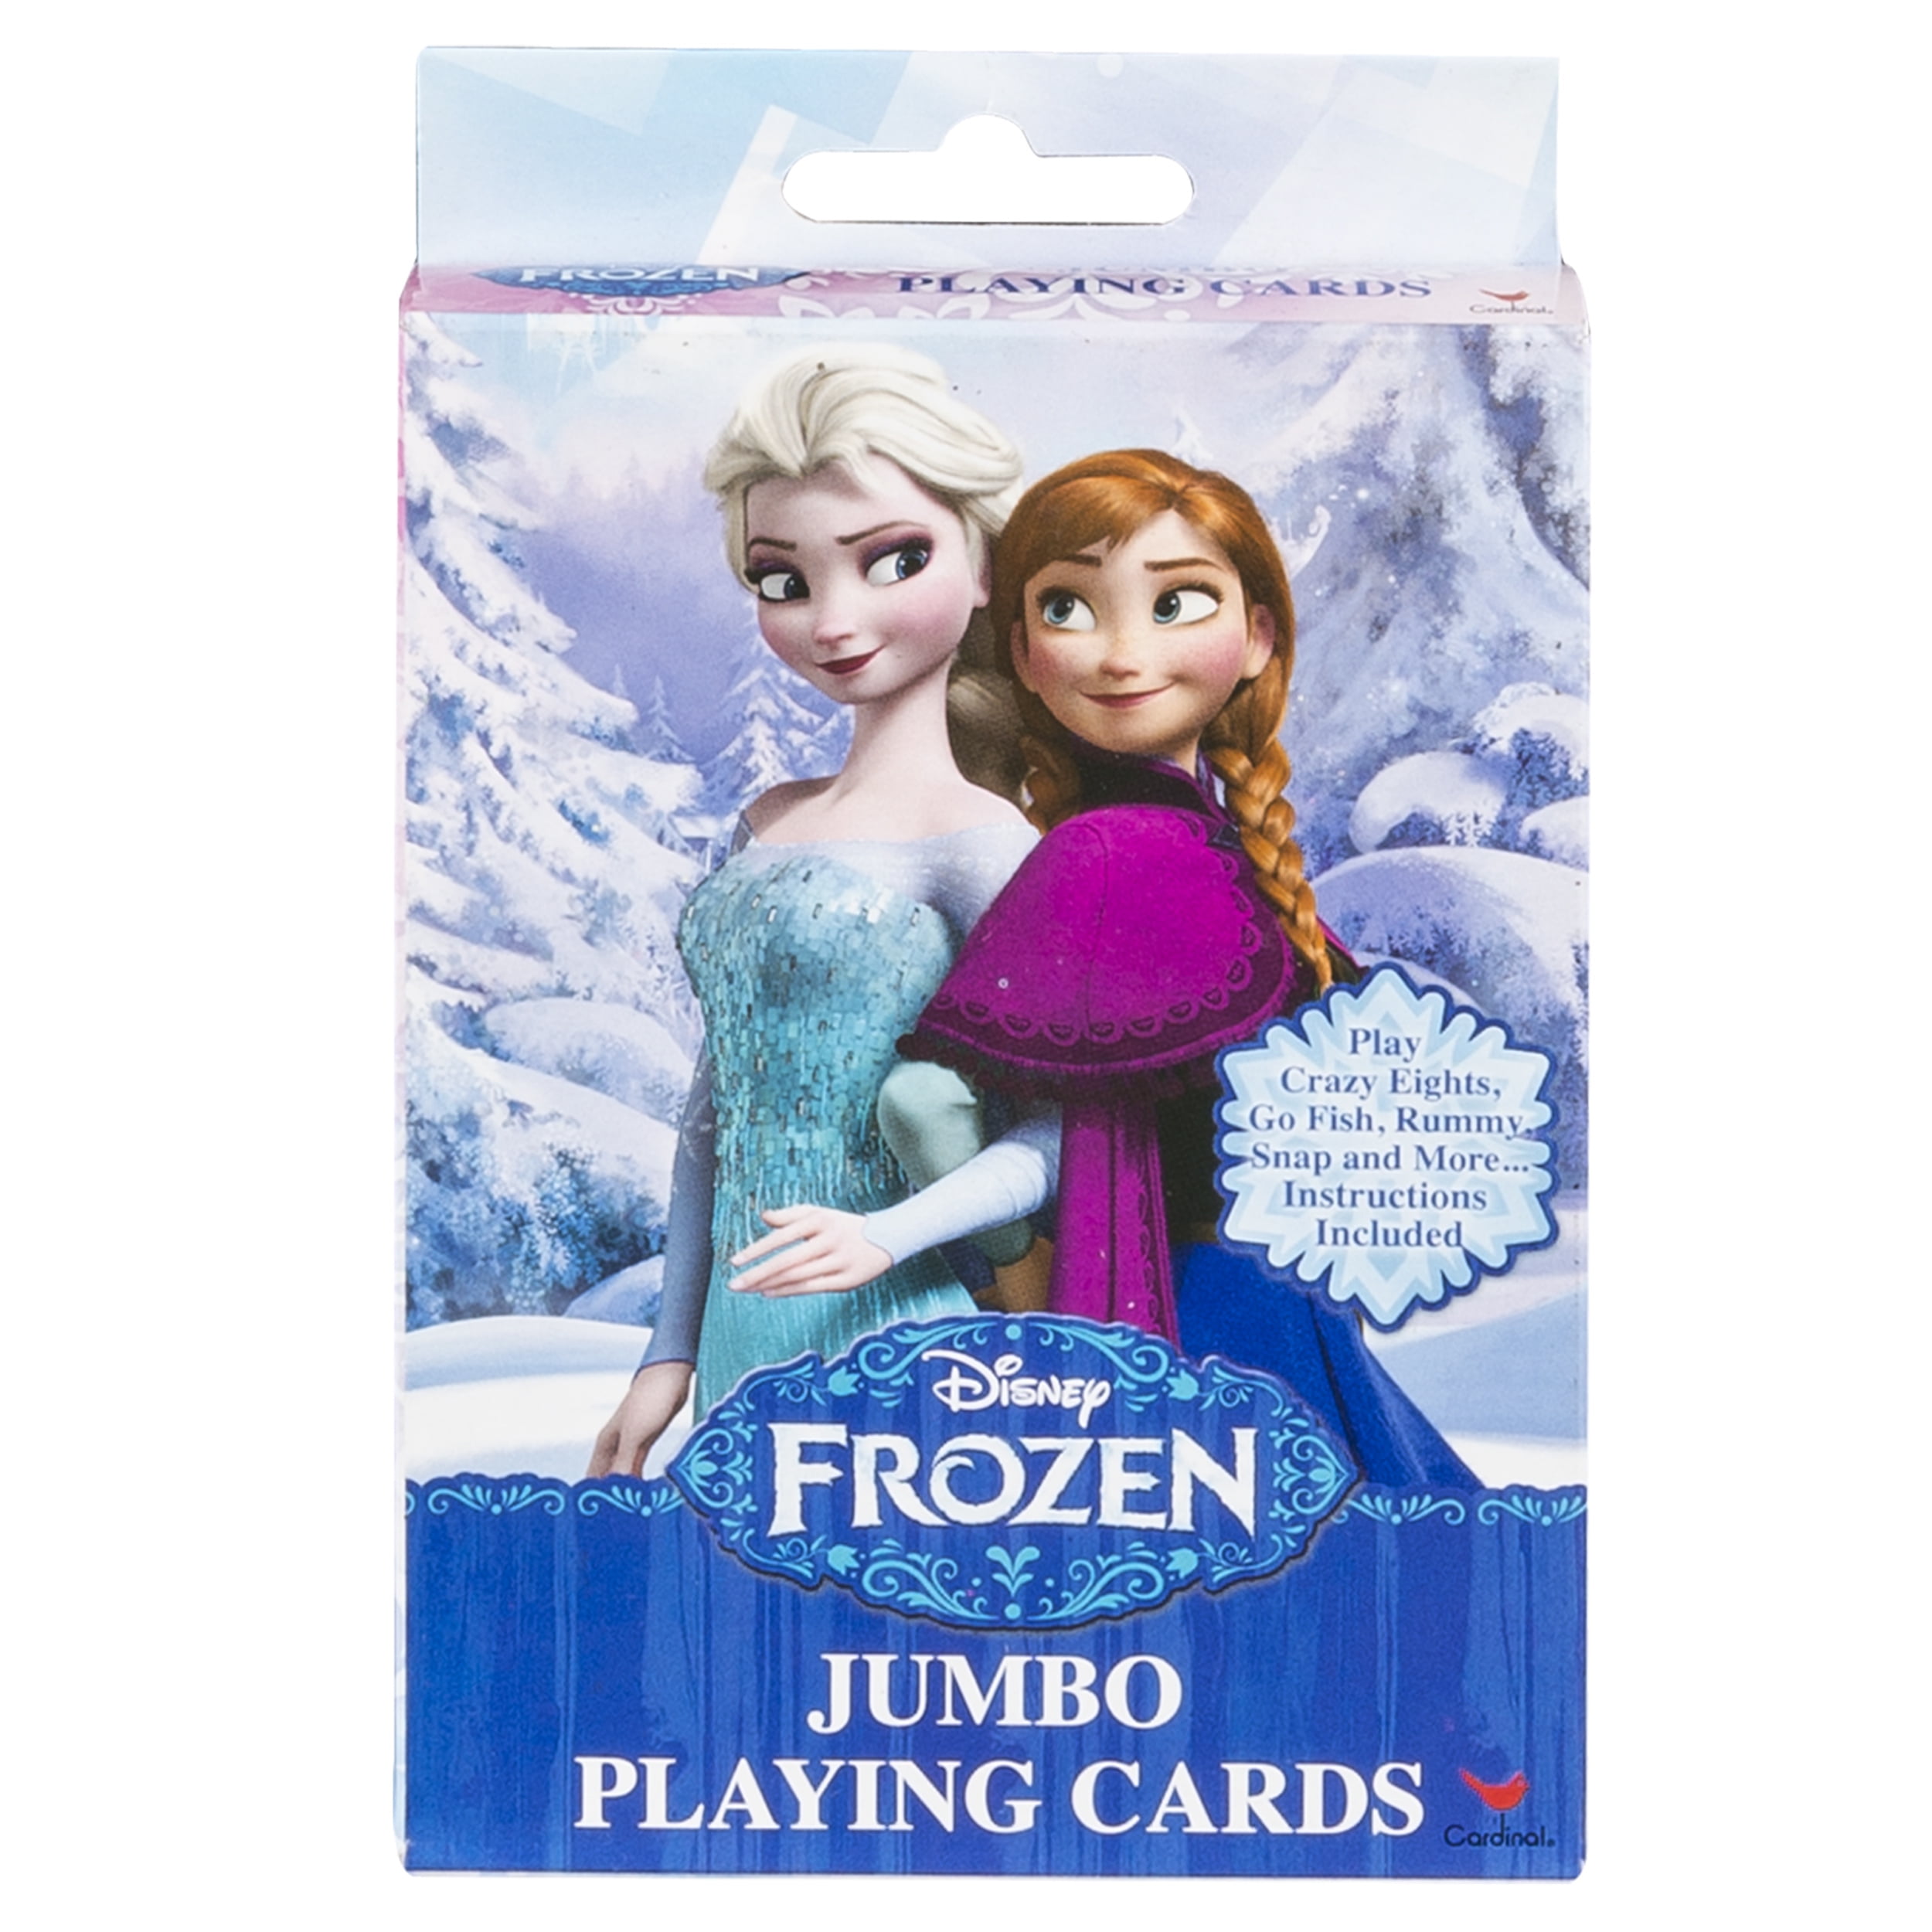 Disney Frozen 2 Jumbo Playing Cards for Ages 4 for sale online 